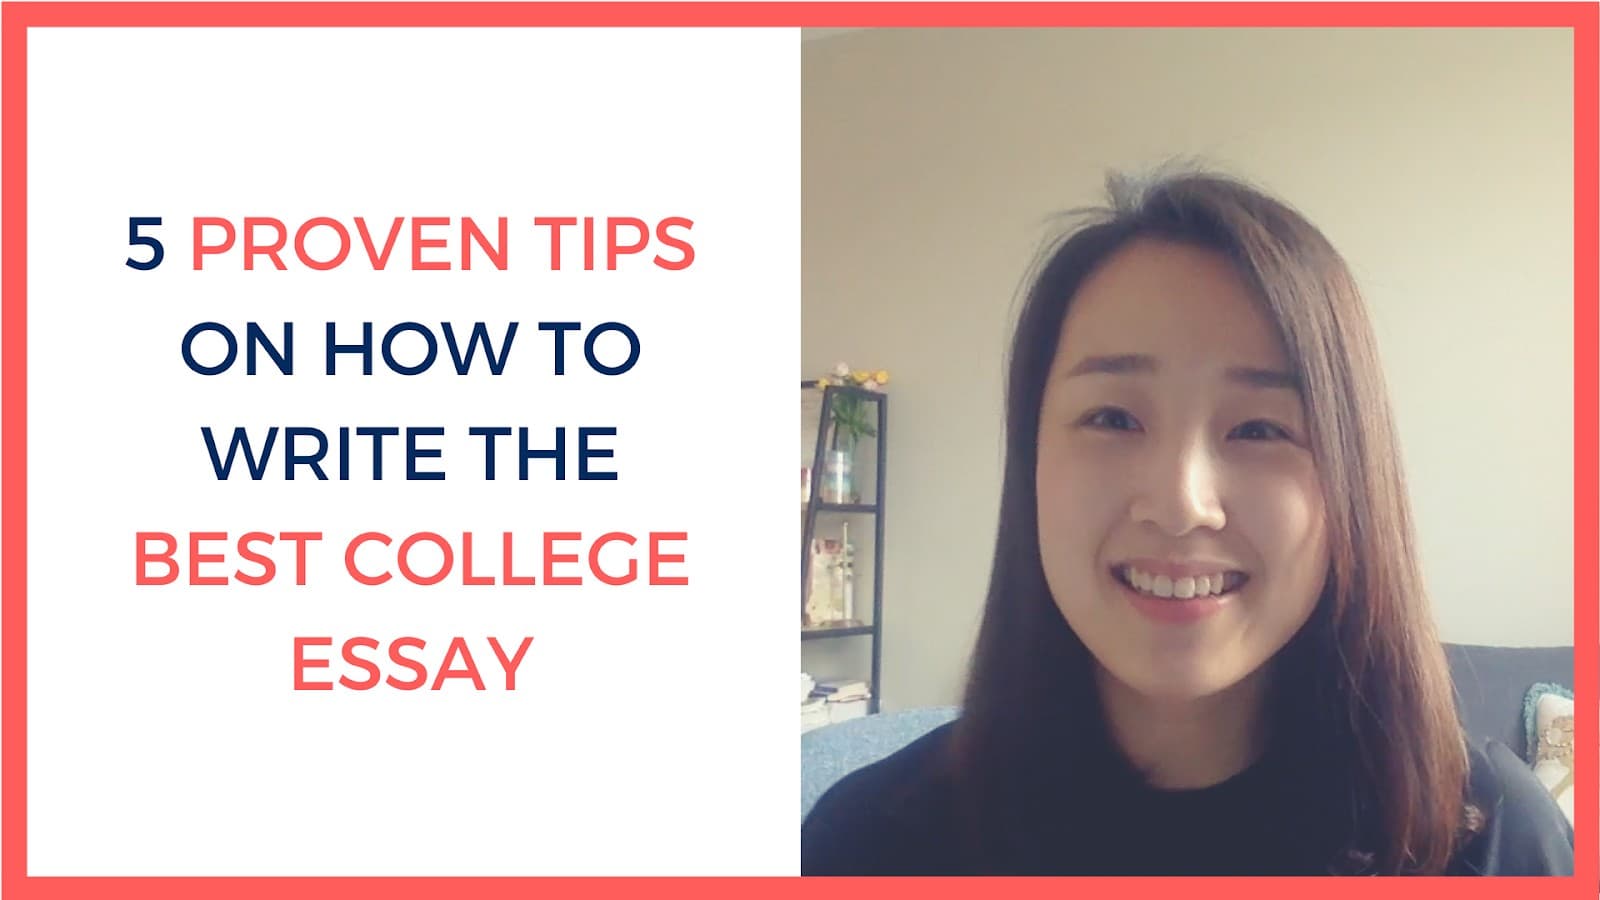 5 Proven Tips to Writing Your Best College Essays